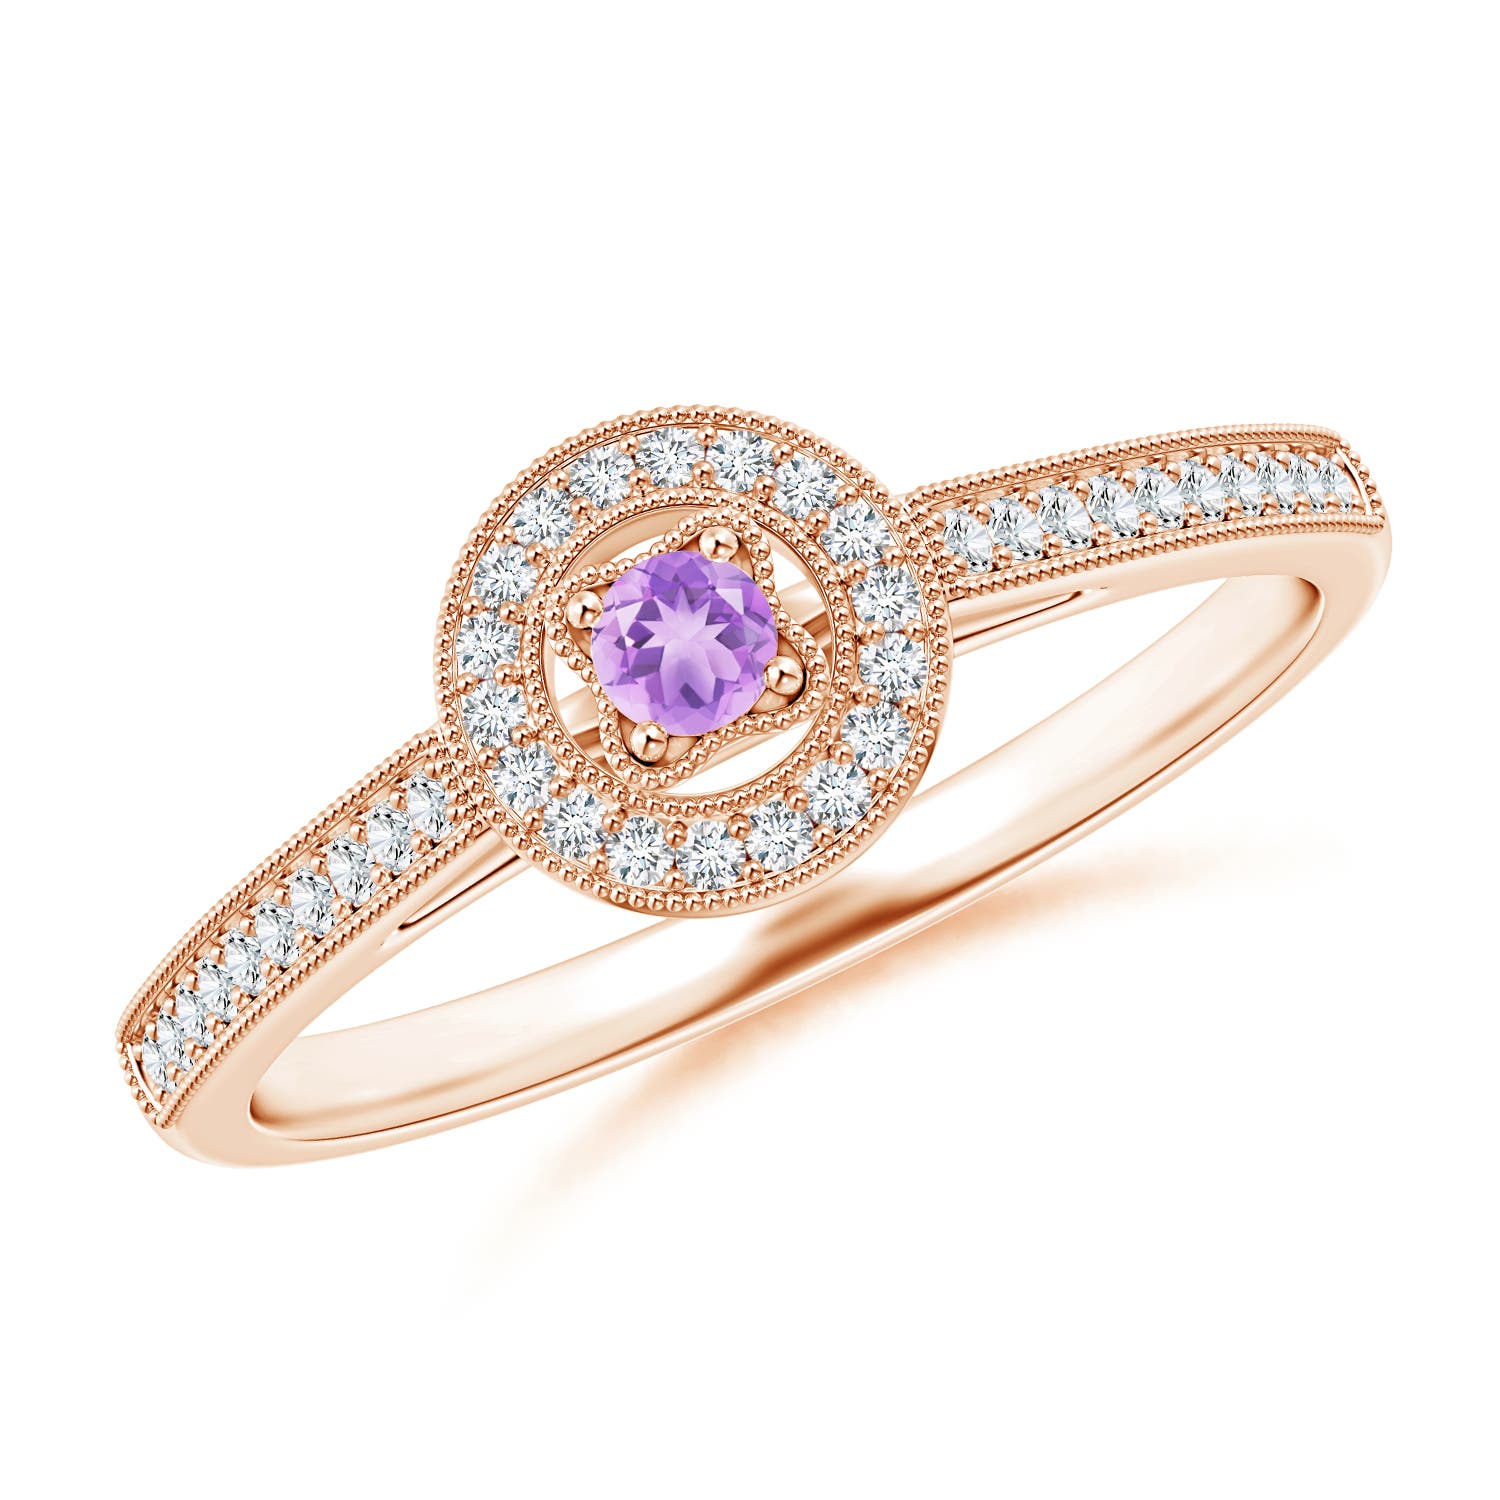 AA - Amethyst / 0.19 CT / 14 KT Rose Gold